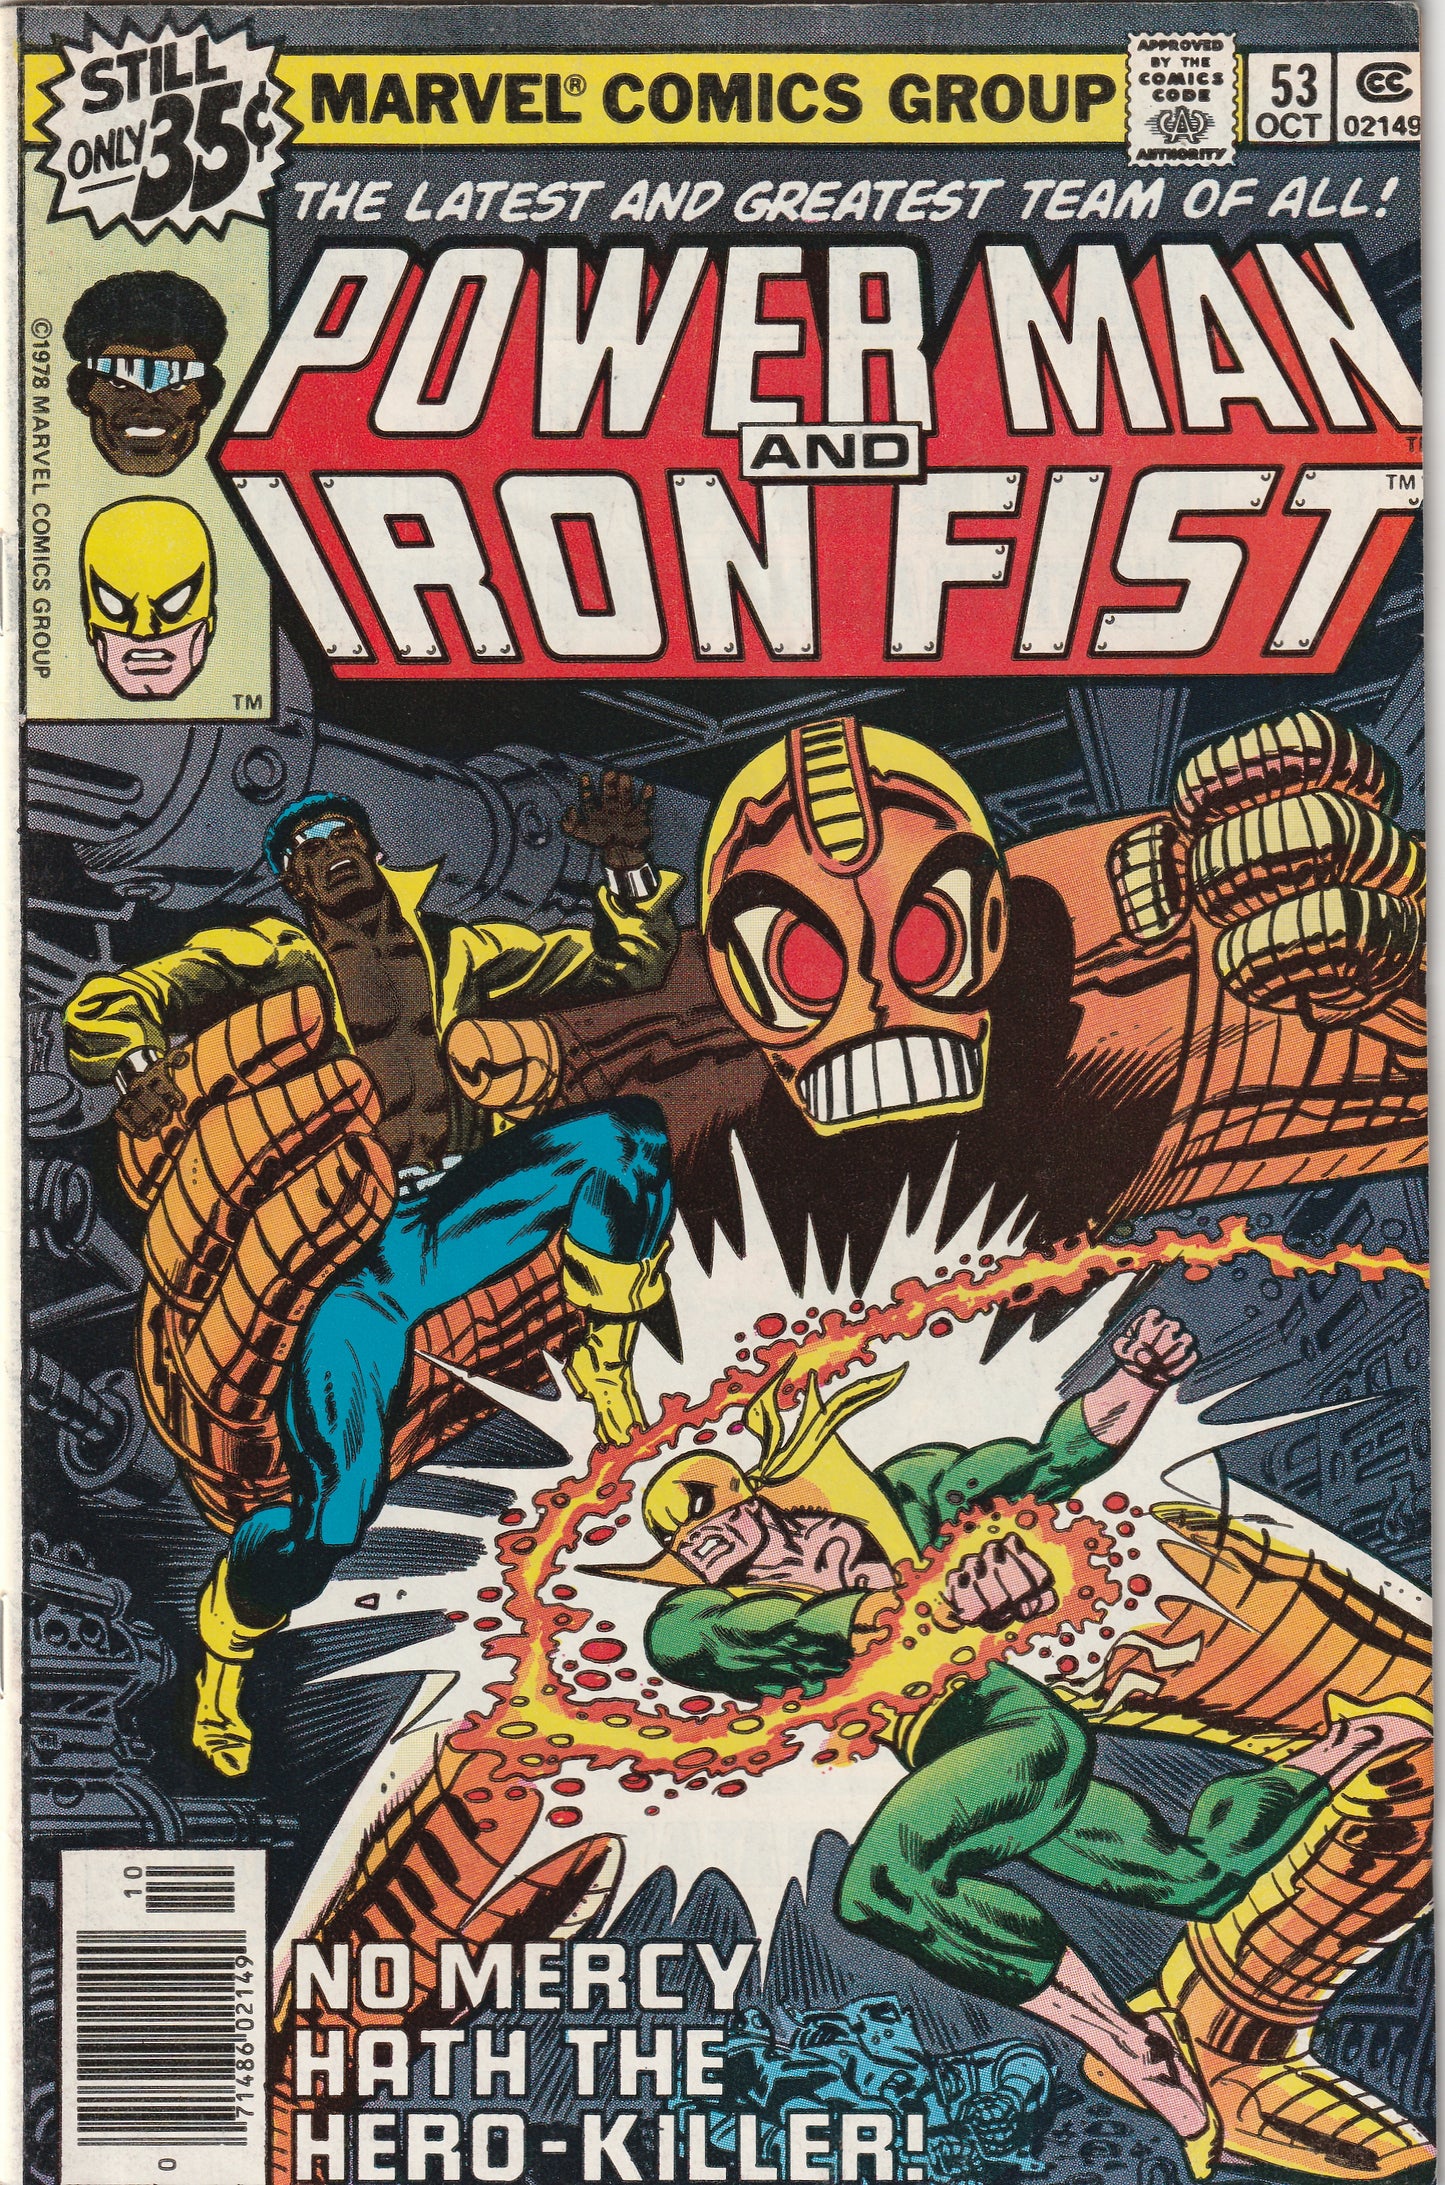 Power Man and Iron Fist #53 (1978) - Nightshade Appearance